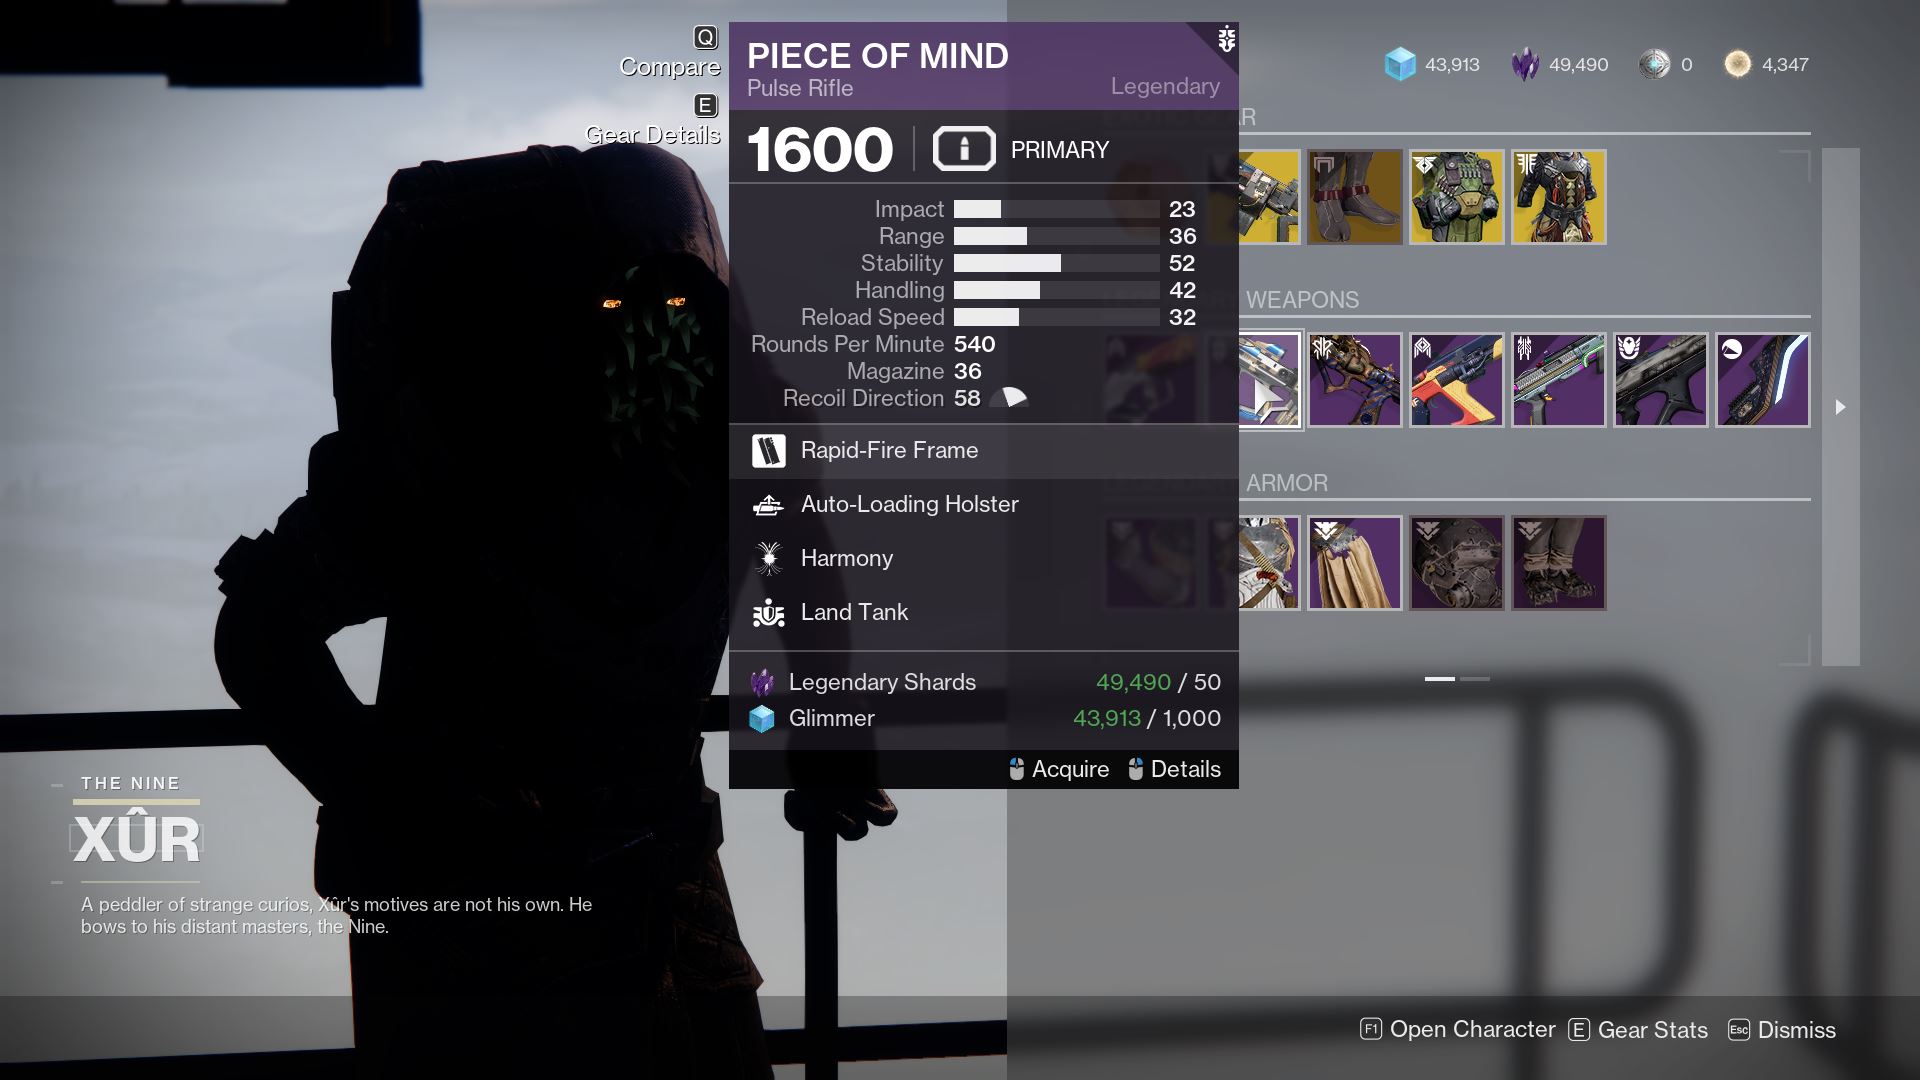 Where Is Xur Today In Destiny 2? Location And Exotic Inventory (September 22 - 26)